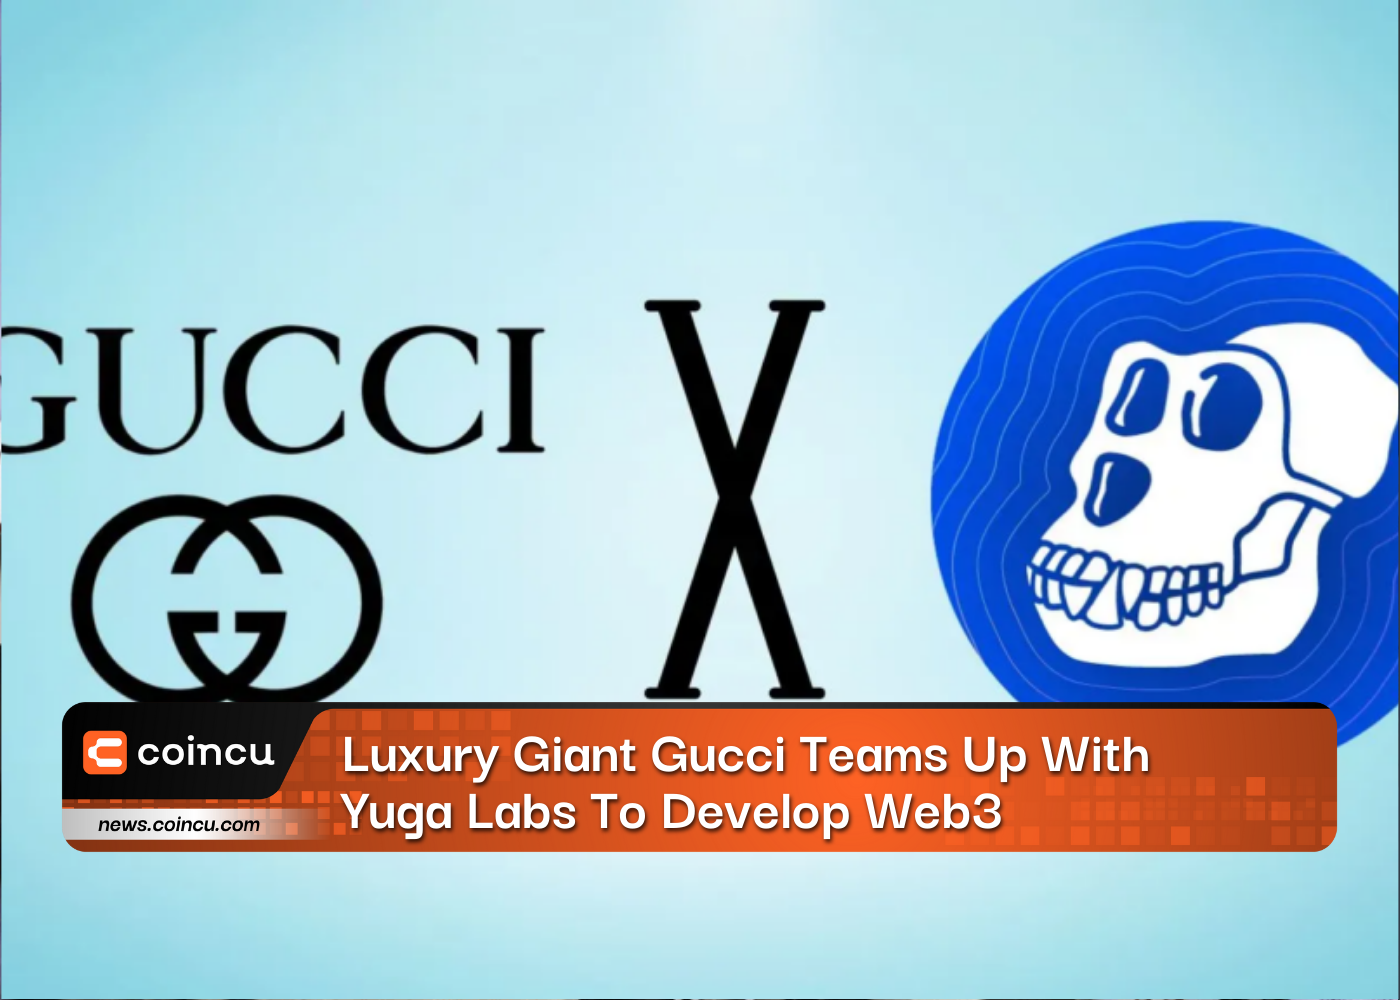 Luxury Giant Gucci Teams Up With Yuga Labs To Develop Web3